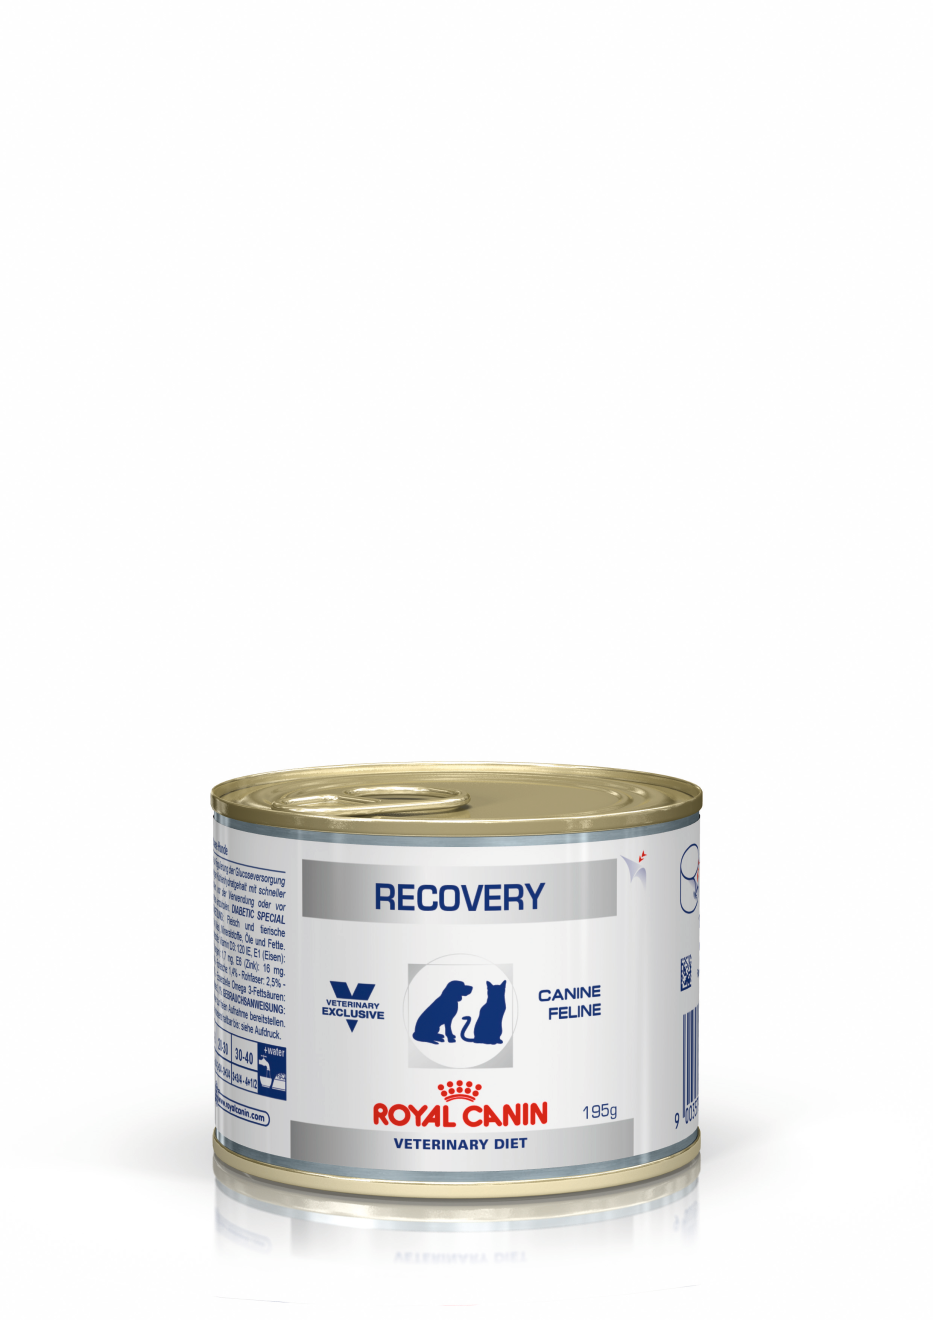 royal canin recovery dog food